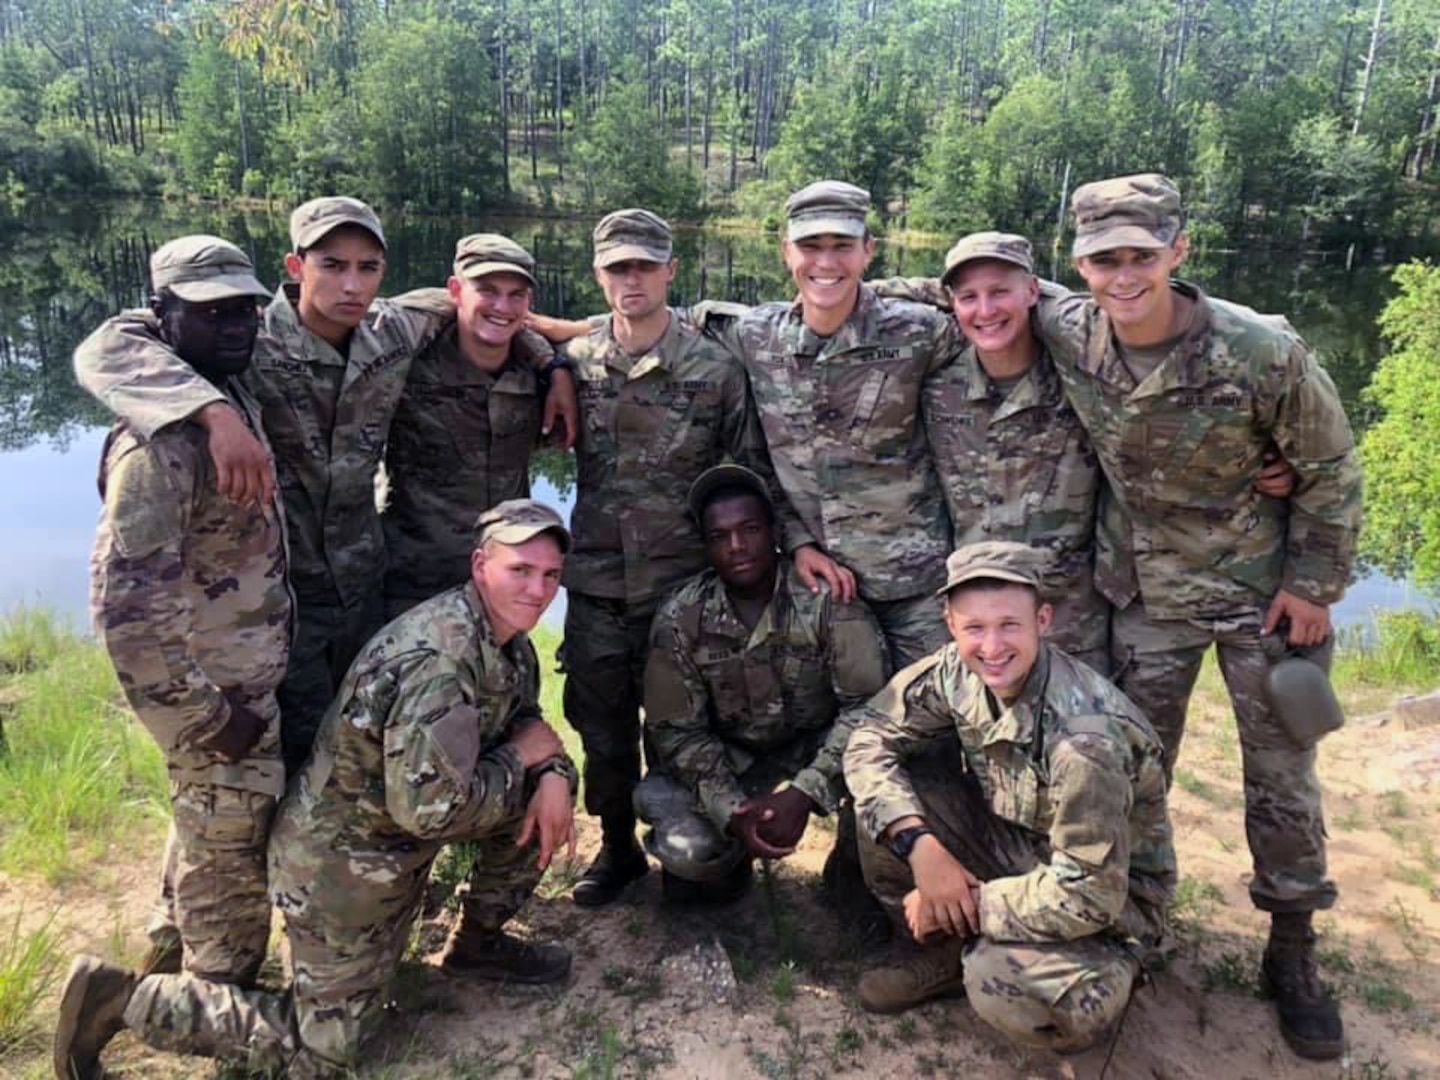 New York Army National Guard Pfc. Jason Snyder, standing at center, marks his completion of the U.S. Army Ranger Course with fellow Rangers Aug. 27, 2020, at Fort Benning, Georgia.